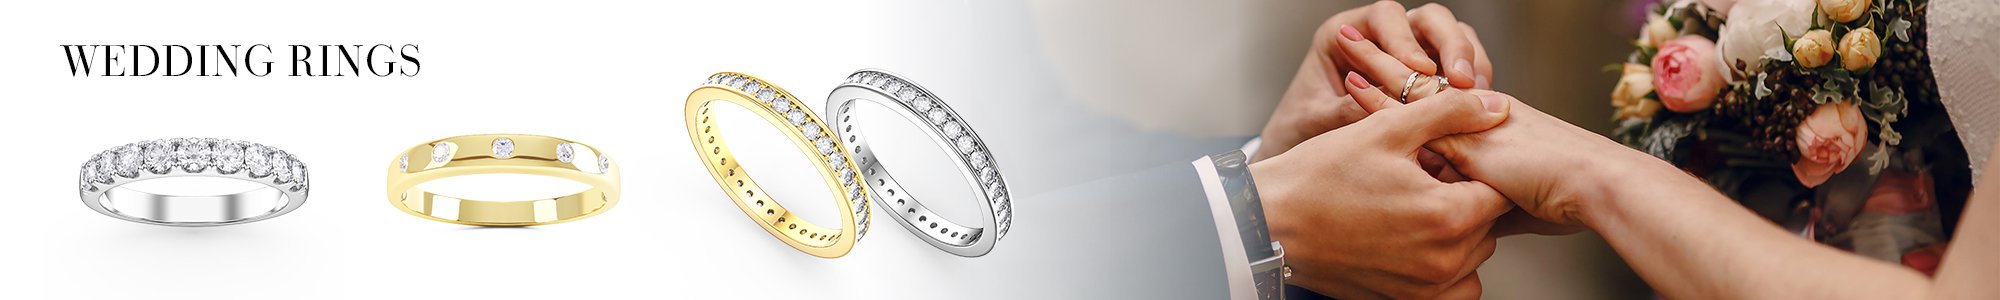 Wedding Rings - From White Sapphire set in Silver to Diamonds set in 18ct Gold or Platinum.